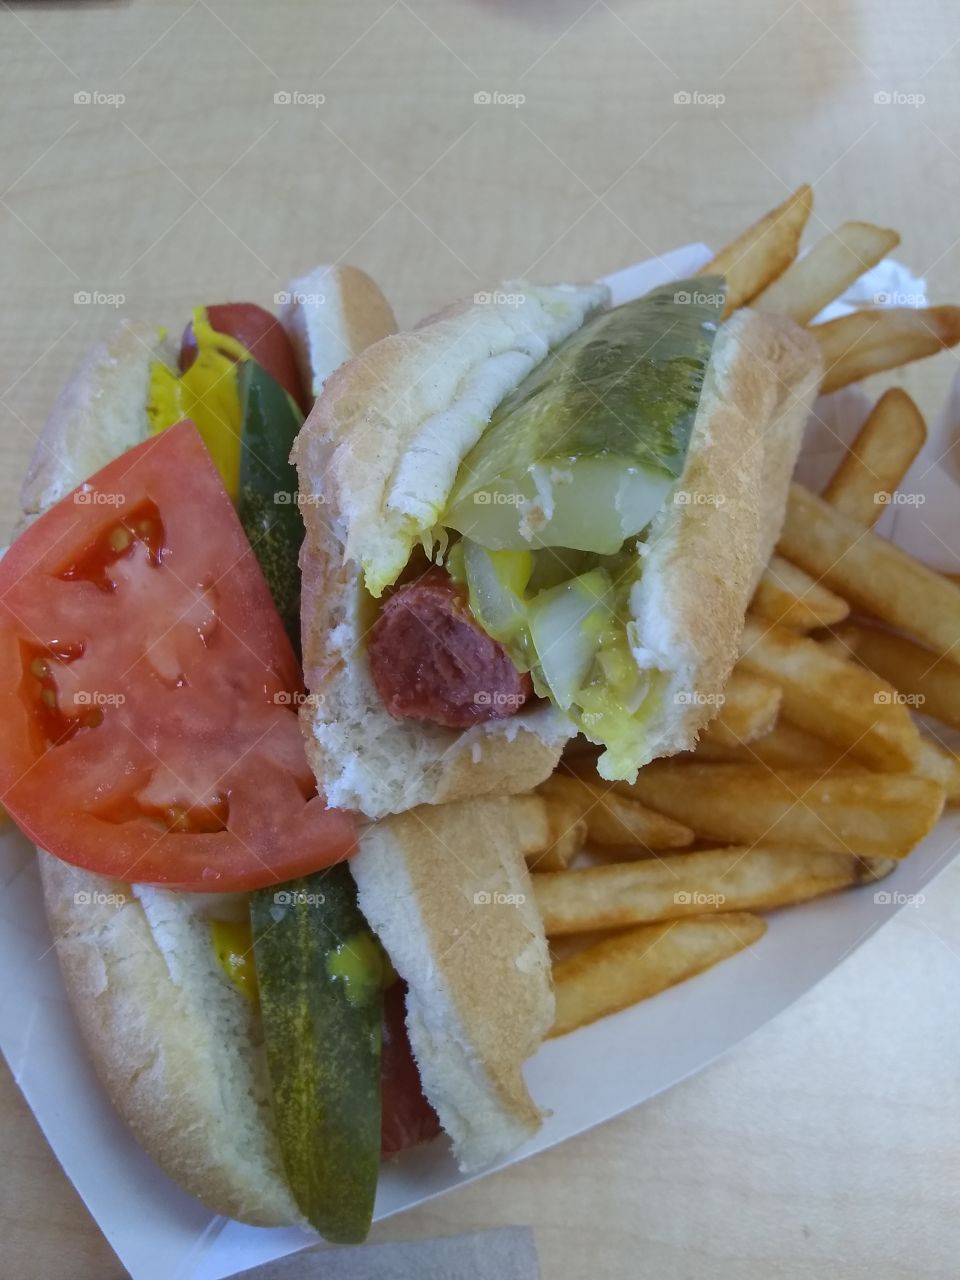 hot dog and fries